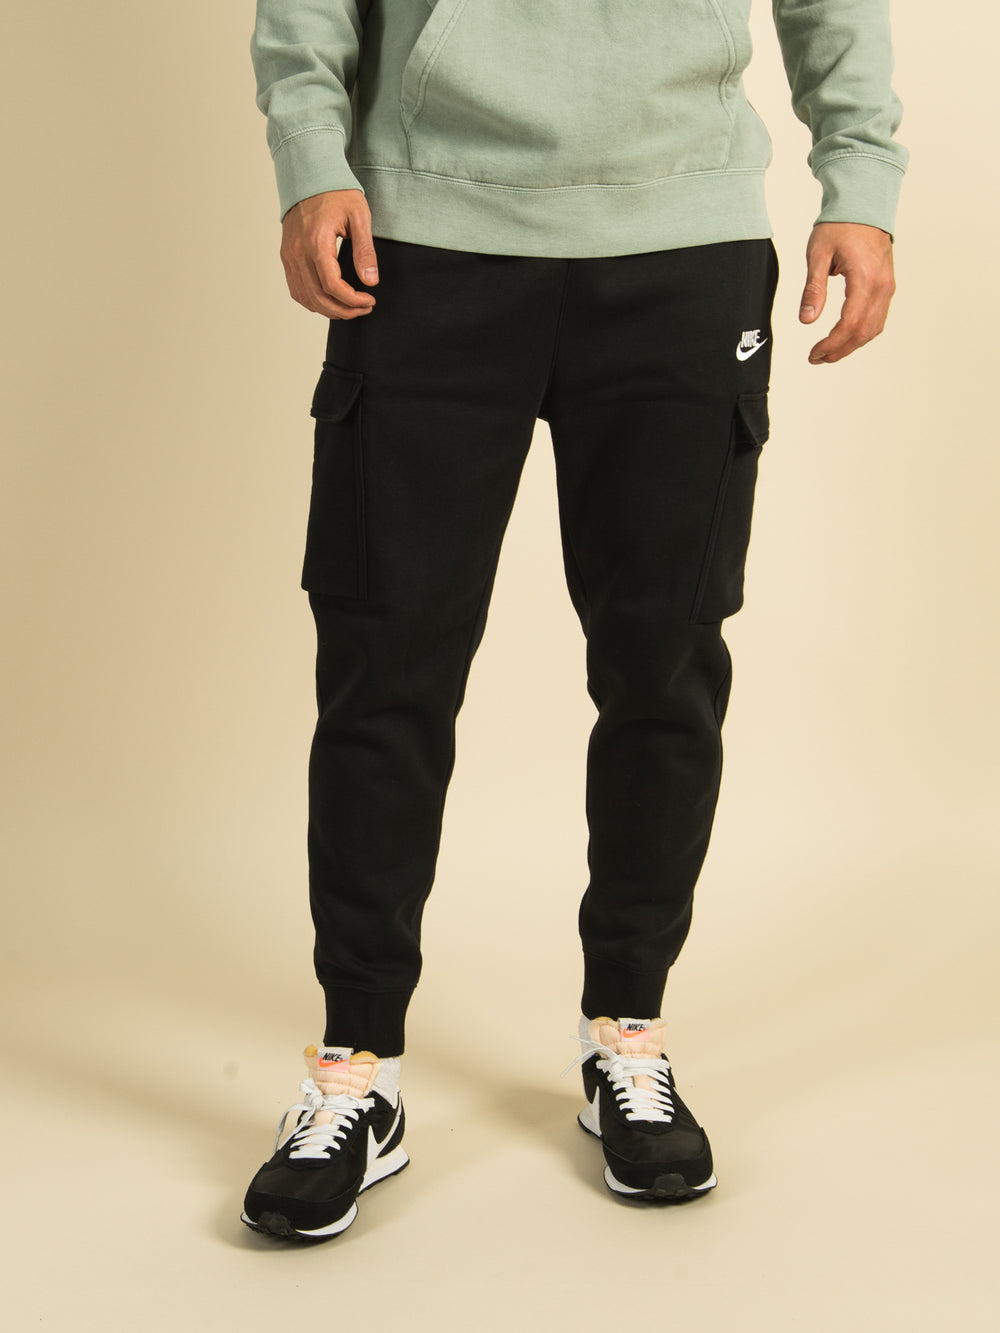 Stay Comfortable and Stylish with Nike Men's Club Fleece Cargo Joggers